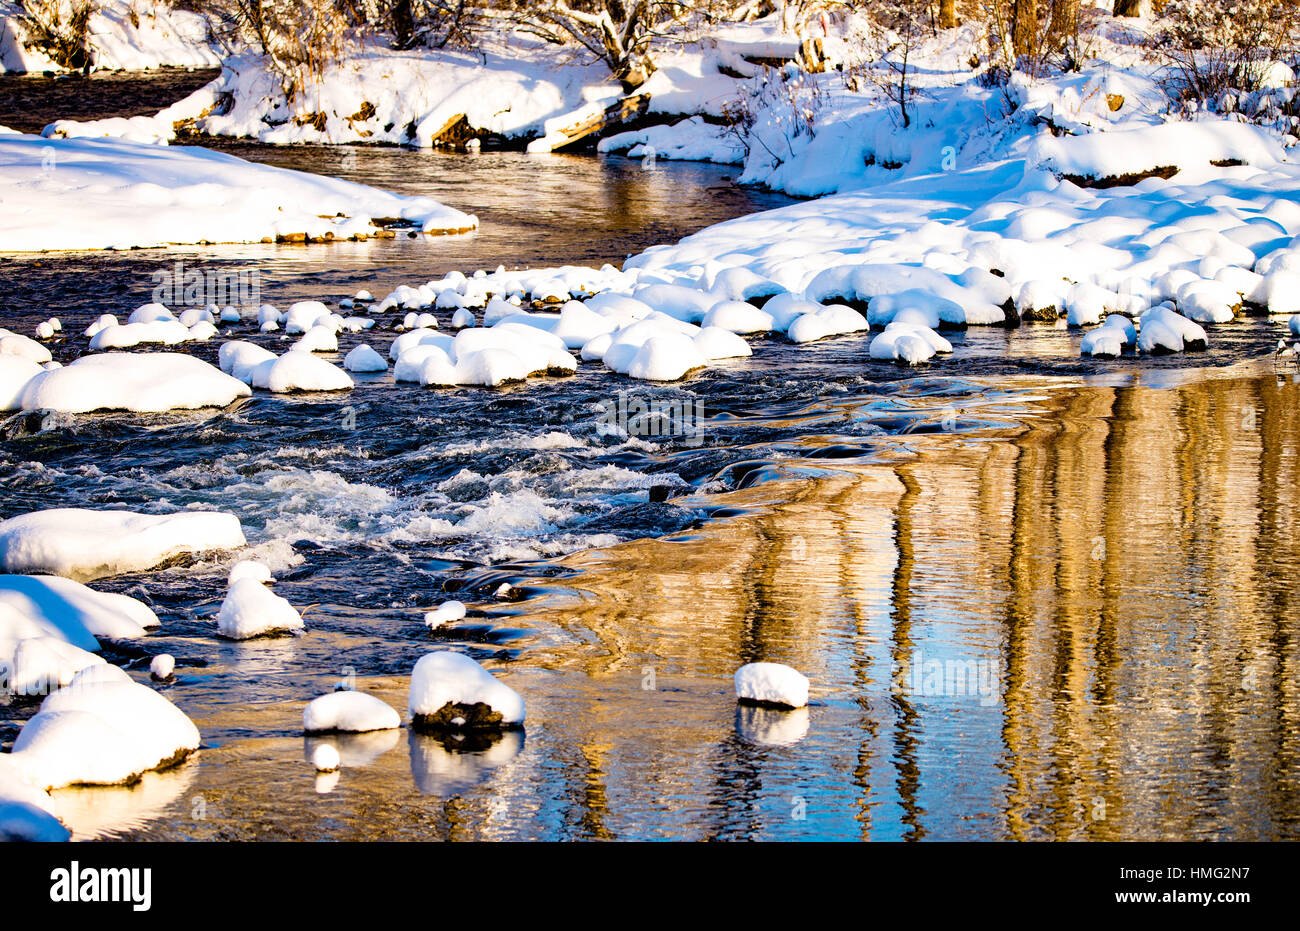 Winter, Reflections of snow and  cottonwood trees in winter. Boise River, Boise, Idaho, USA Stock Photo